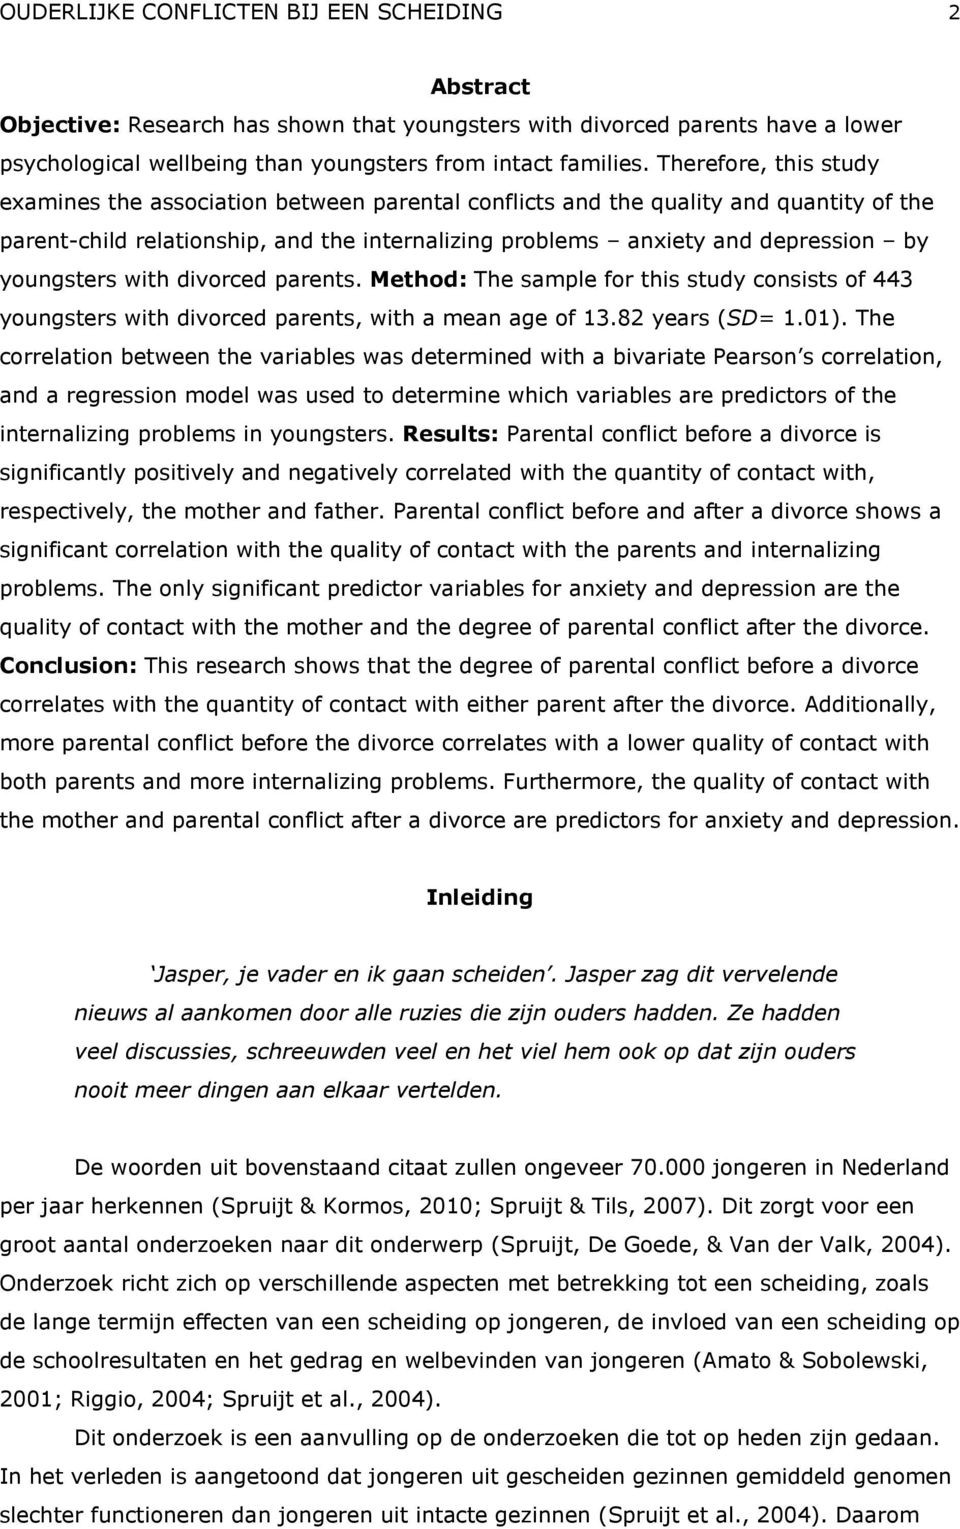 youngsters with divorced parents. Method: The sample for this study consists of 443 youngsters with divorced parents, with a mean age of 13.82 years (SD= 1.01).